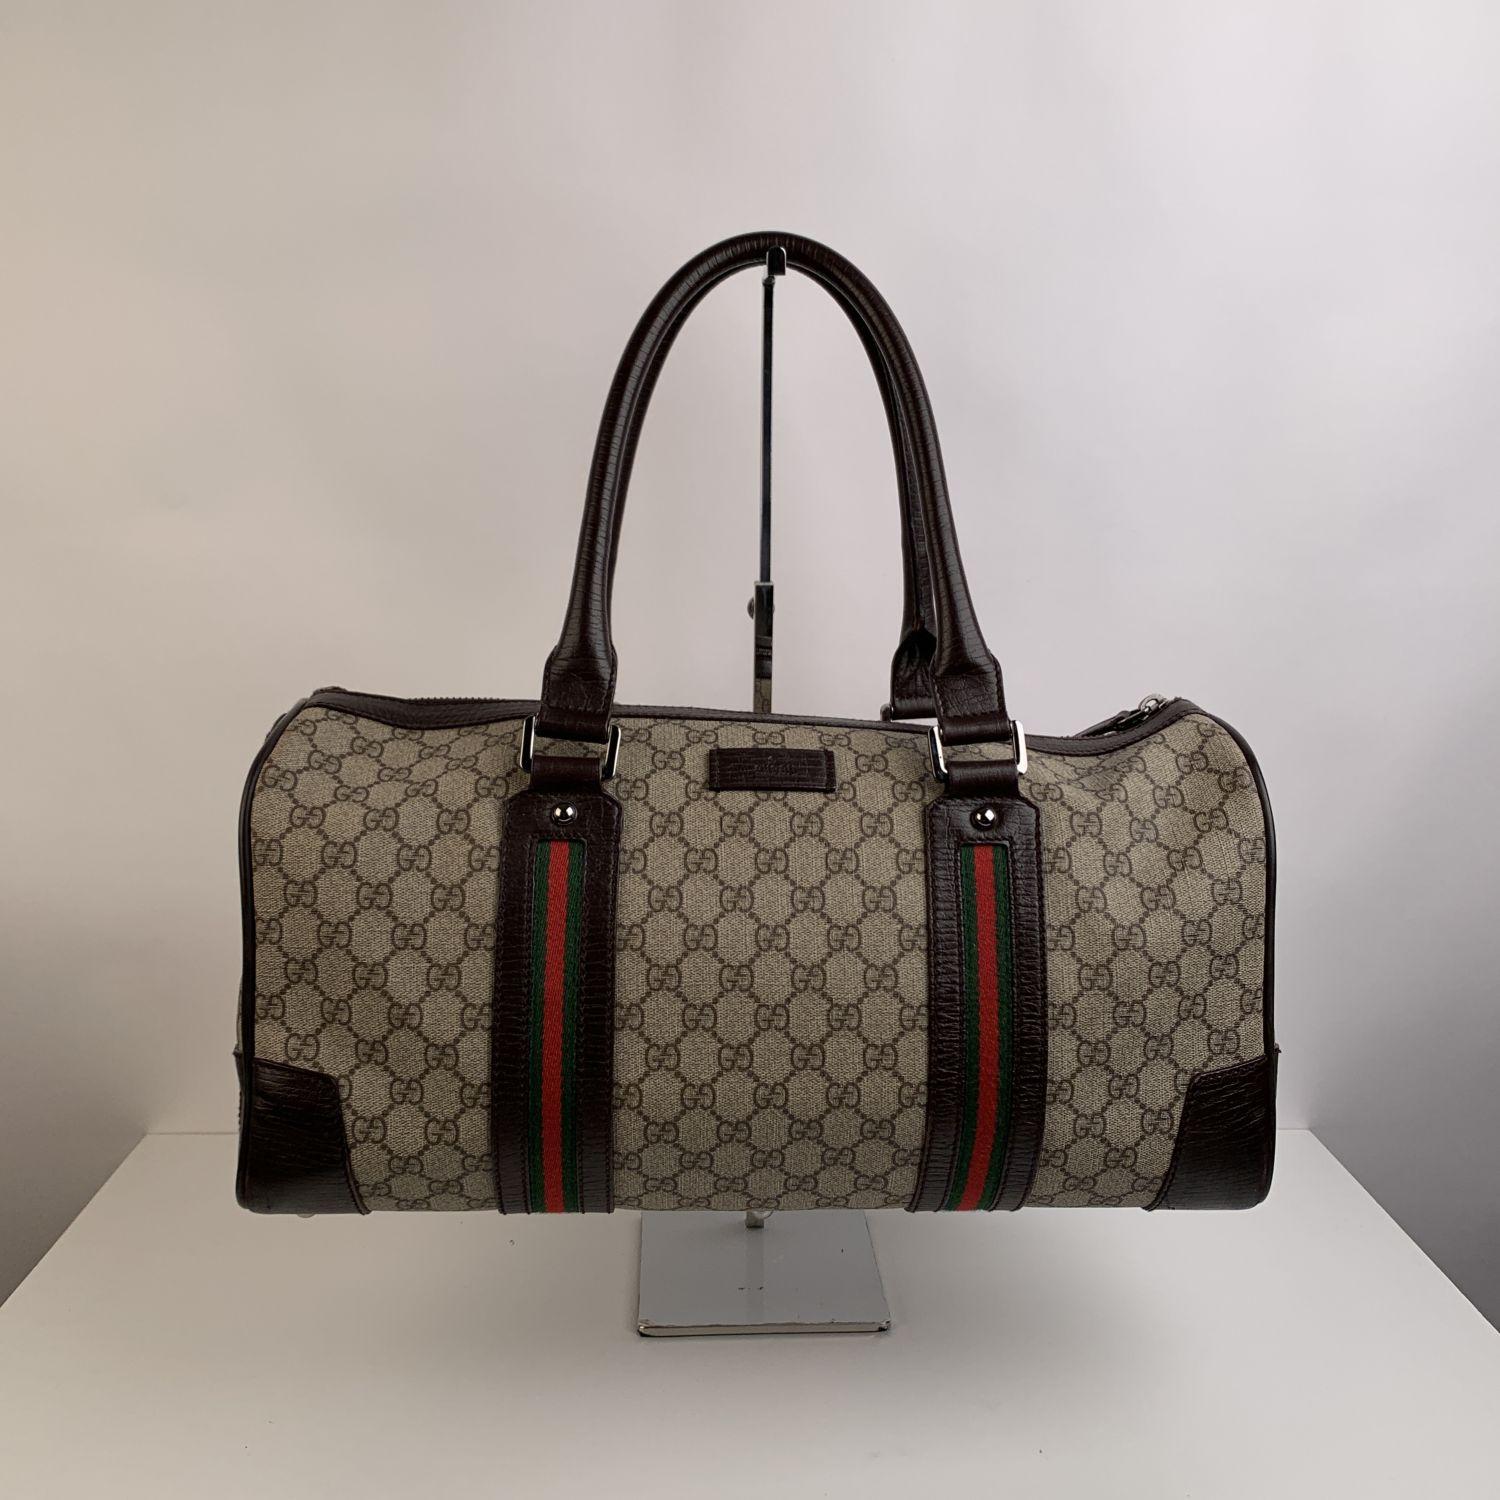 Gucci Web Carry On Duffle top handle Boston Bag. The bag is crafted in Gucci GG monogram canvas with dark brown leather trim. It features double green/red/green signature Web stripes and silver metal hardware. Fabric lining. Interior zip pocket.